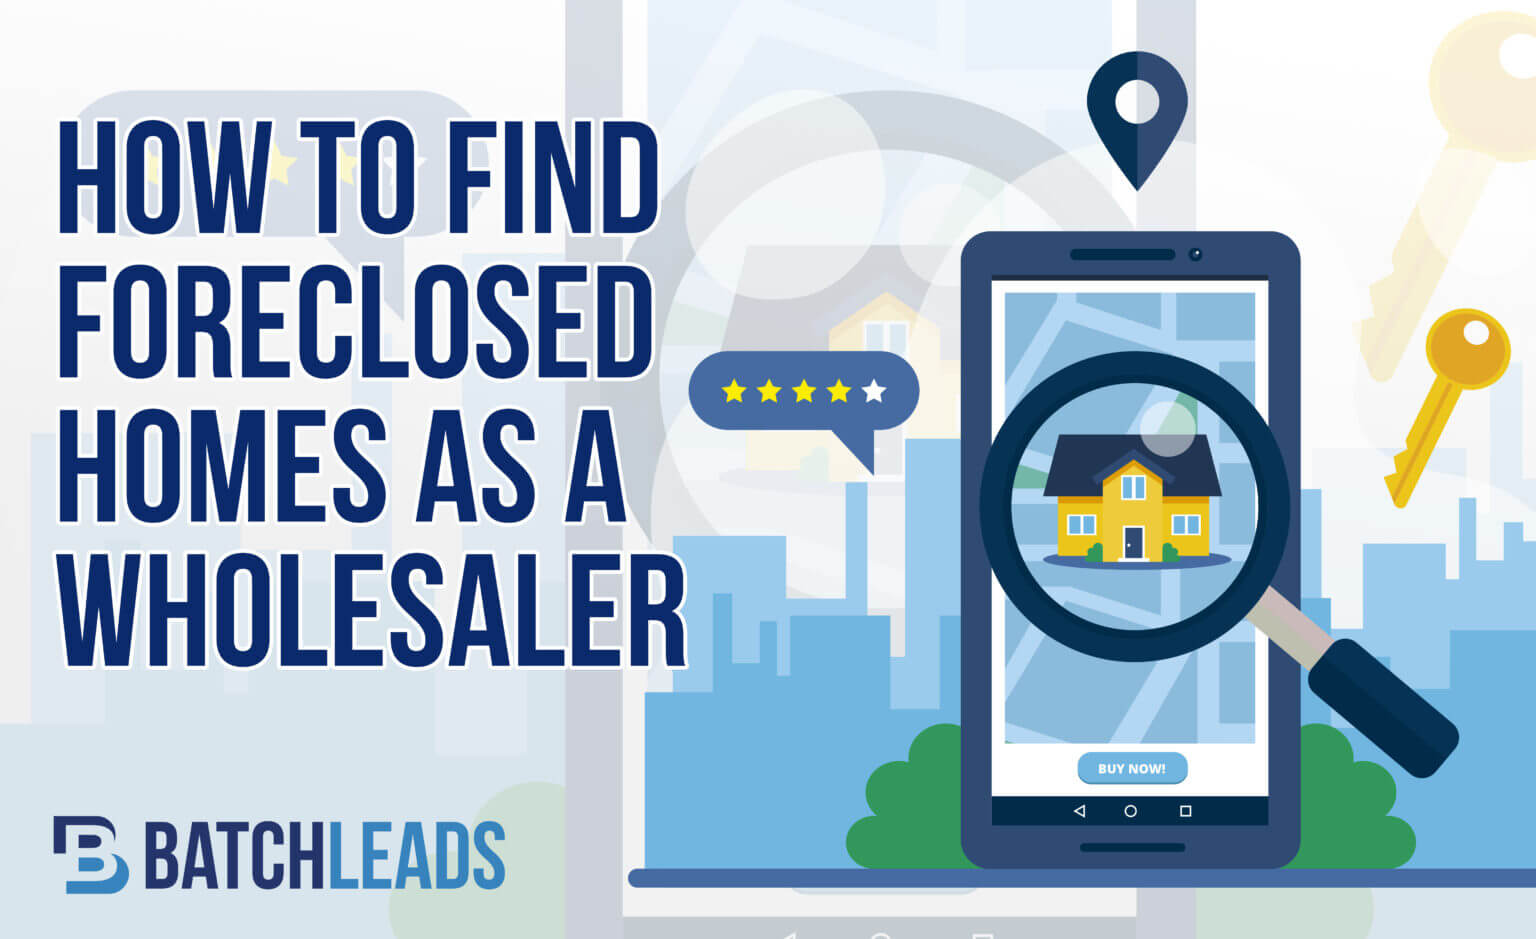 How To Find Foreclosed Homes As A Wholesaler